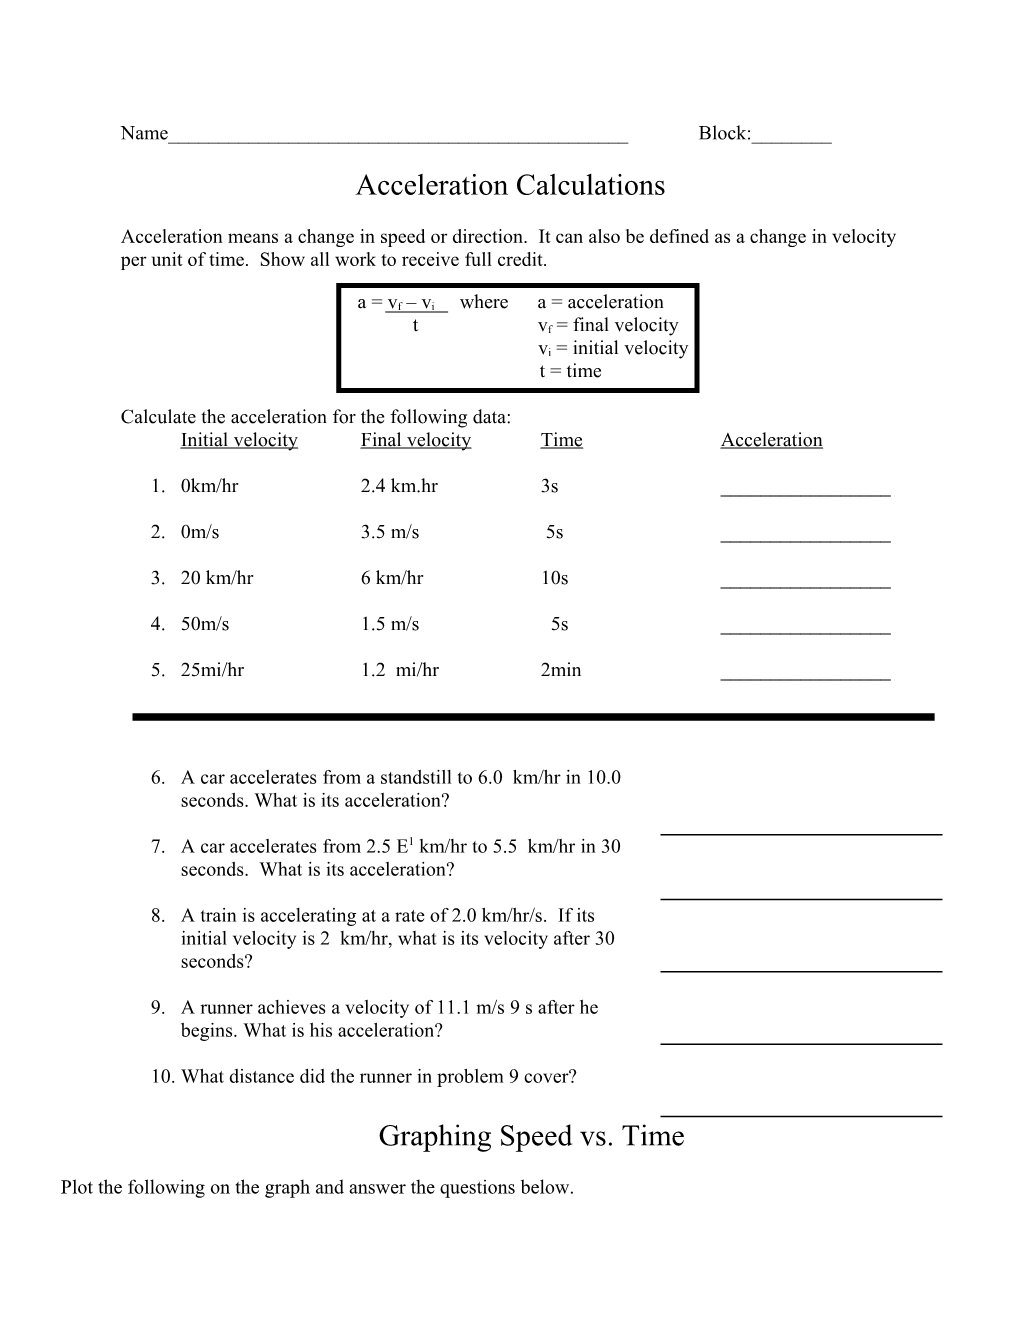 Acceleration Calculations